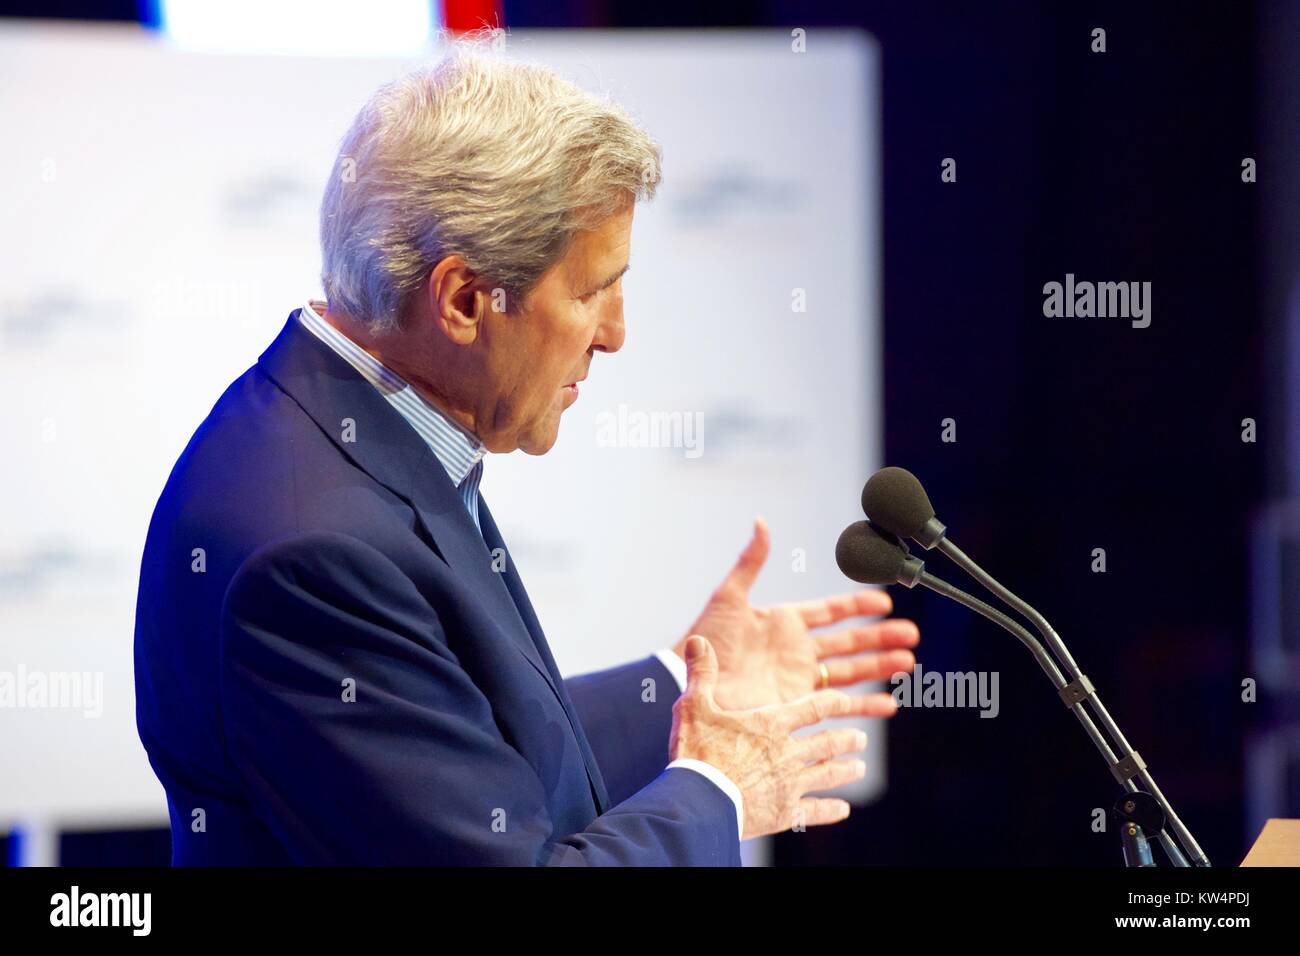 US Secretary of State John Kerry delivering opening remarks at the Global Entrepreneurship Summit, Palo Alto, California, June 23, 2016. Image courtesy US Department of State. Stock Photo